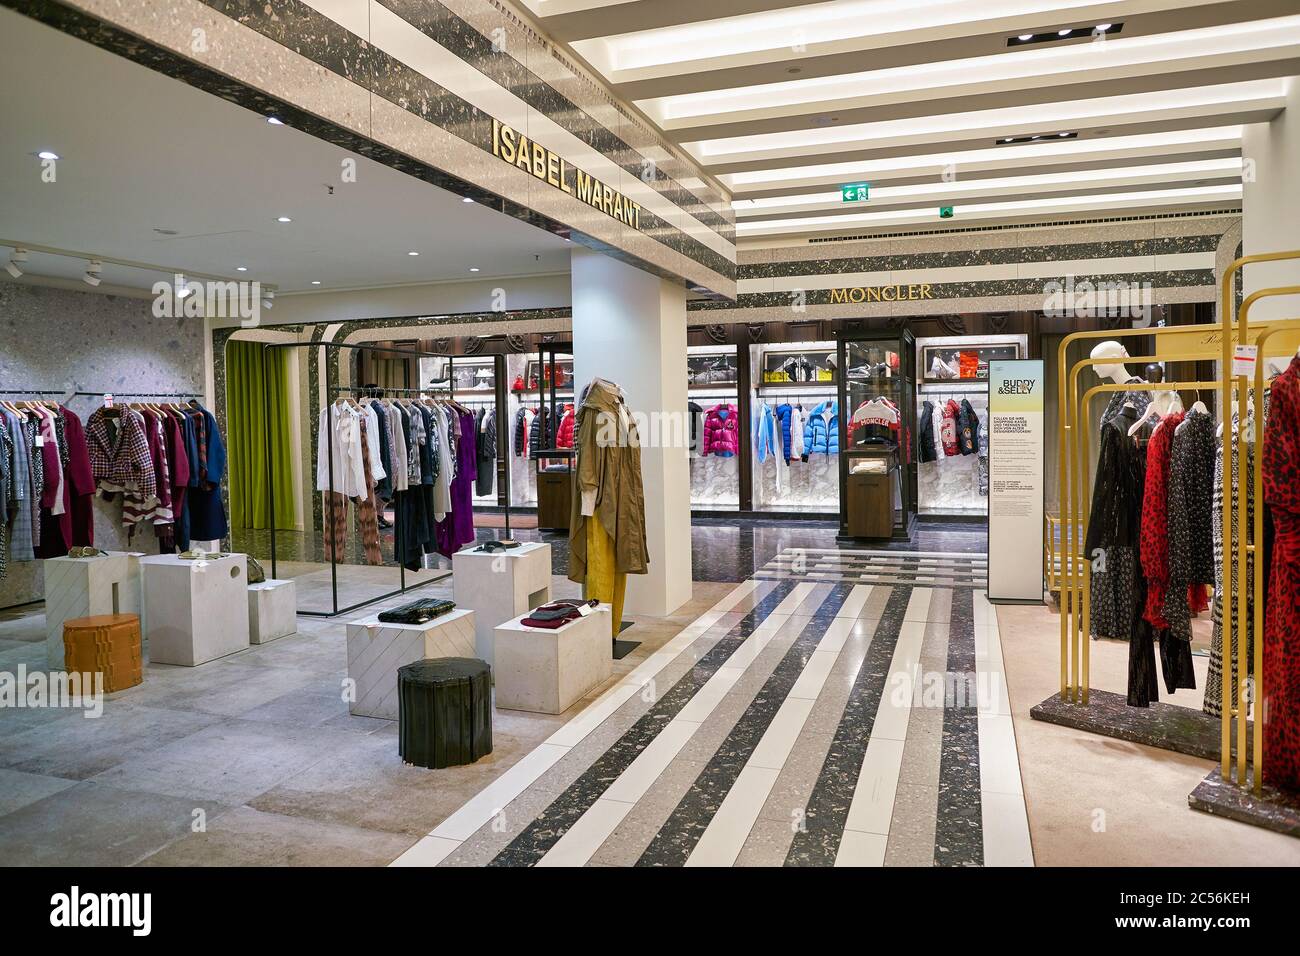 Marant Store High Stock Photography Images - Alamy